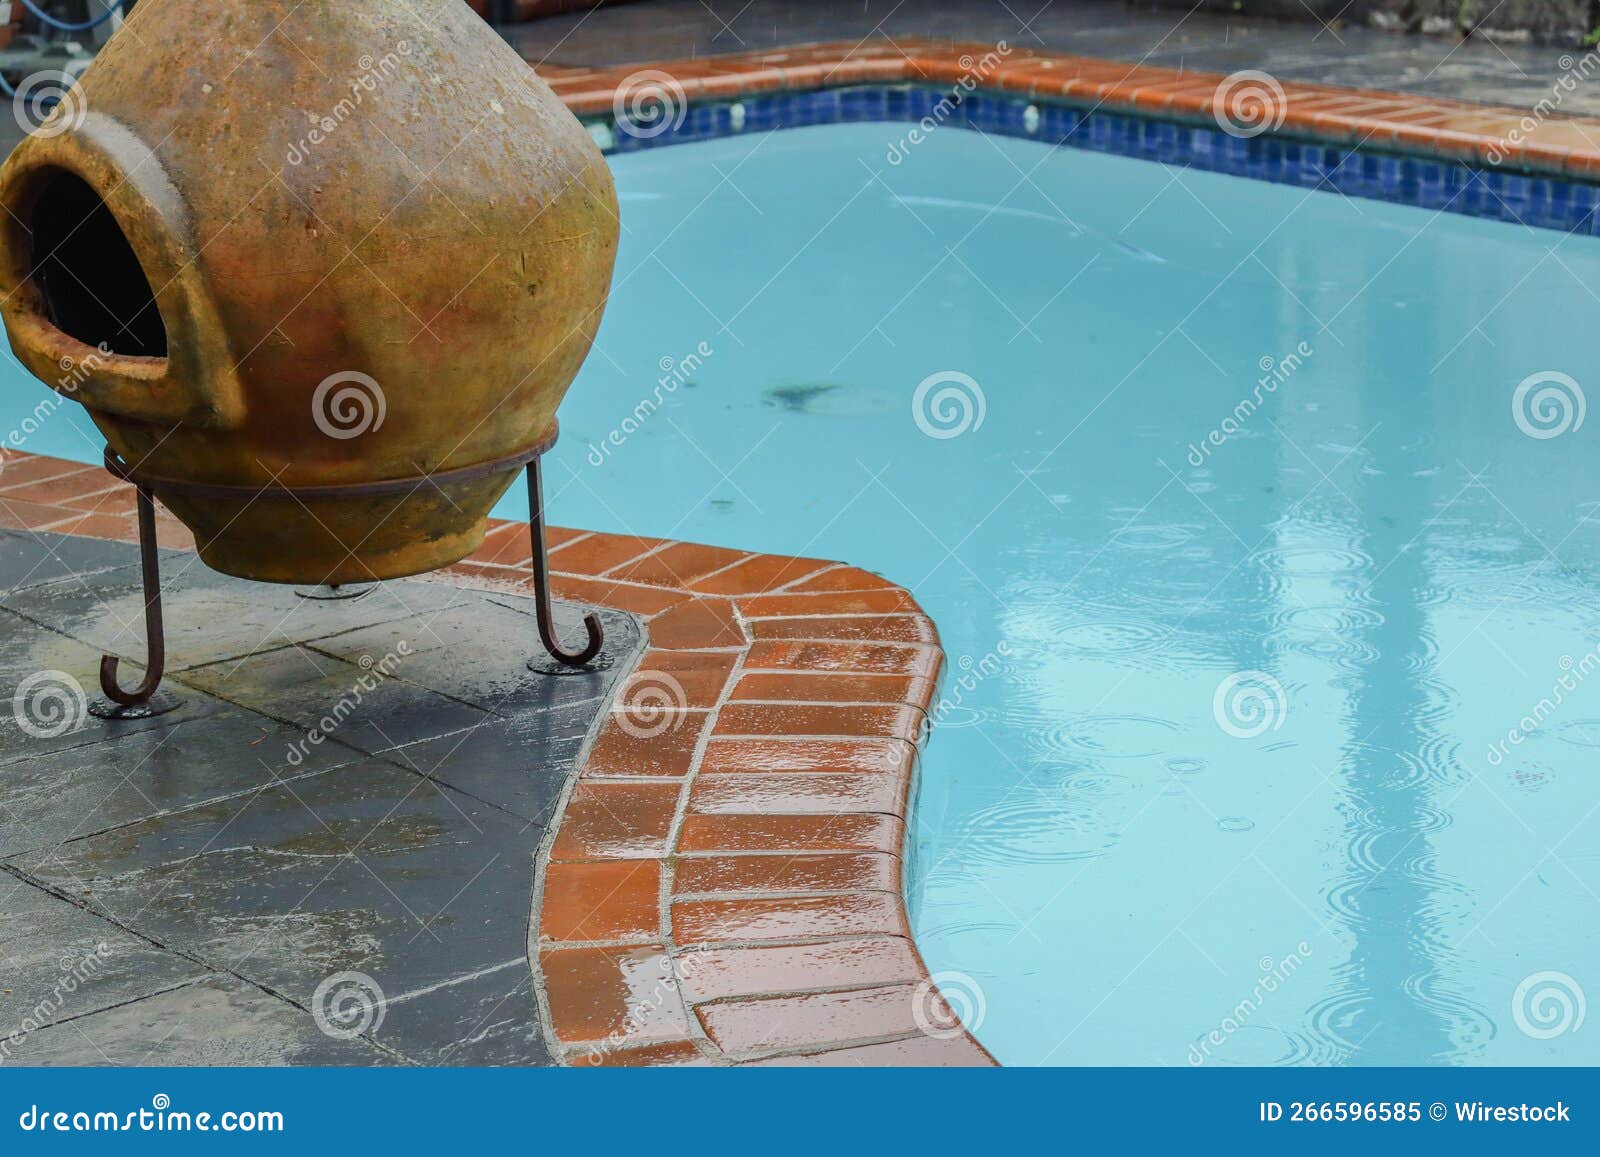 chimenea next to the pool full of clear water on the rainy weather day on blurred background